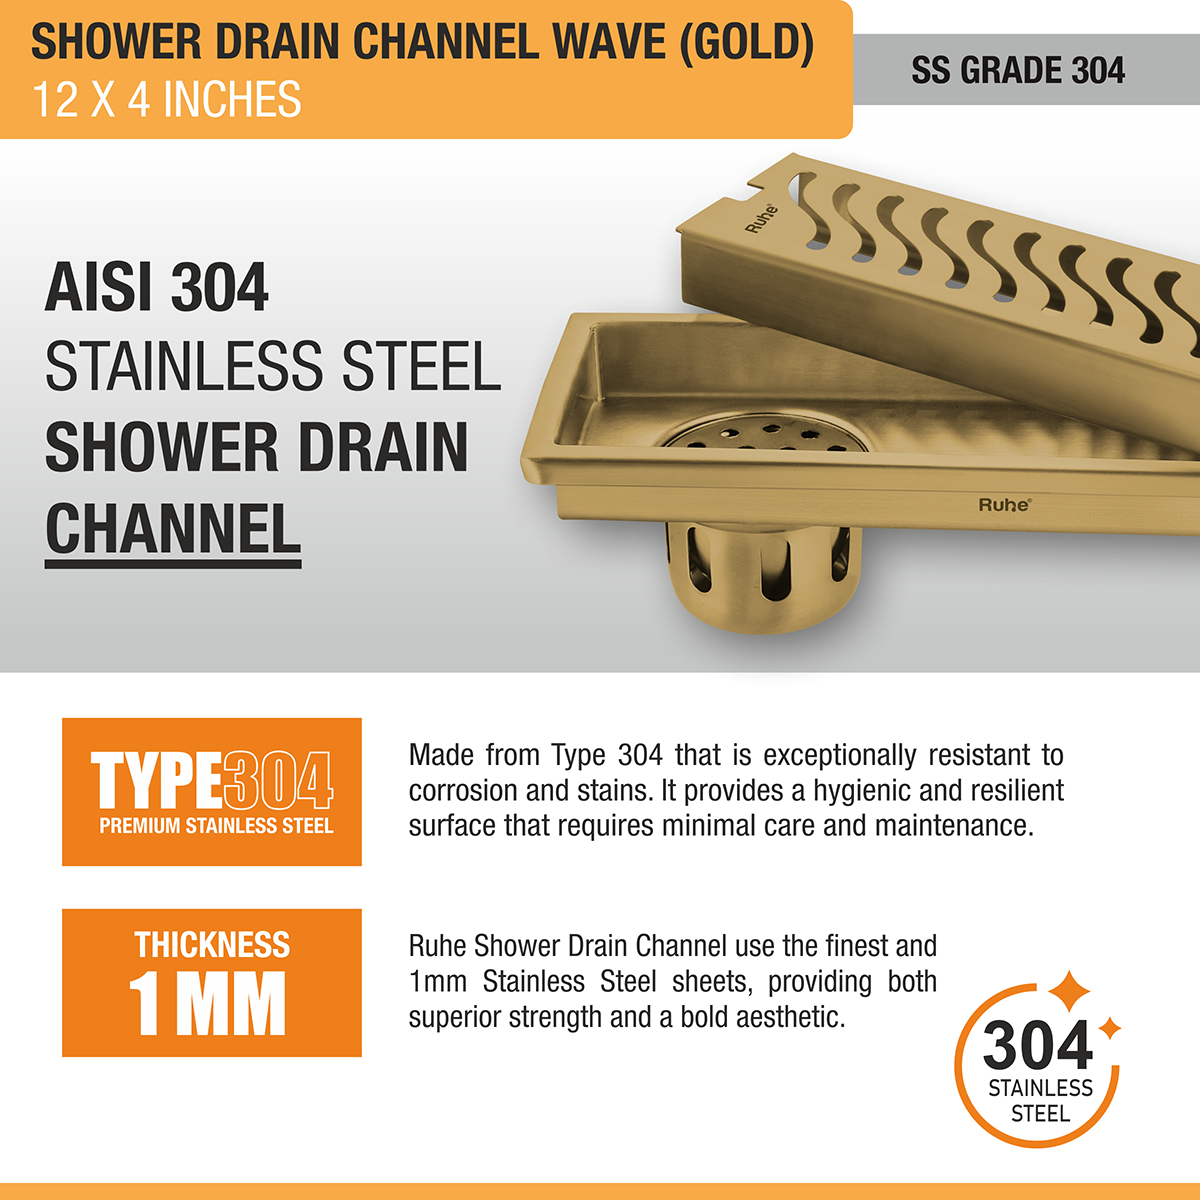 Wave Shower Drain Channel (12 x 4 Inches) YELLOW GOLD stainless steel